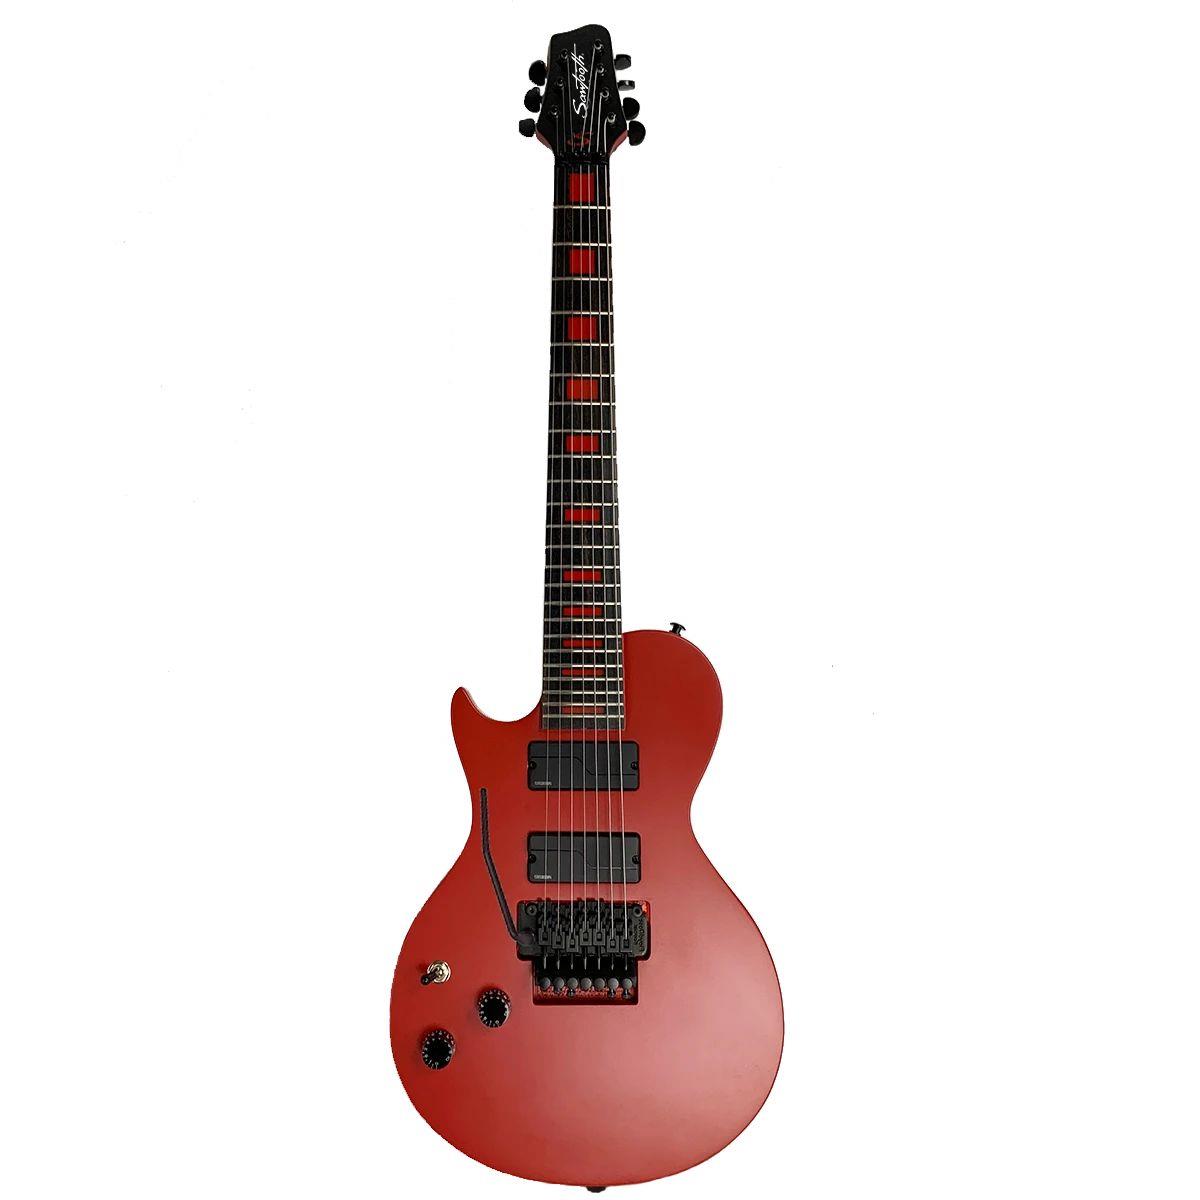 Sawtooth Americana Heritage HM724 7-String Left-Handed Electric Guitar,Satin Red -  ST-HM-724-LH-SR